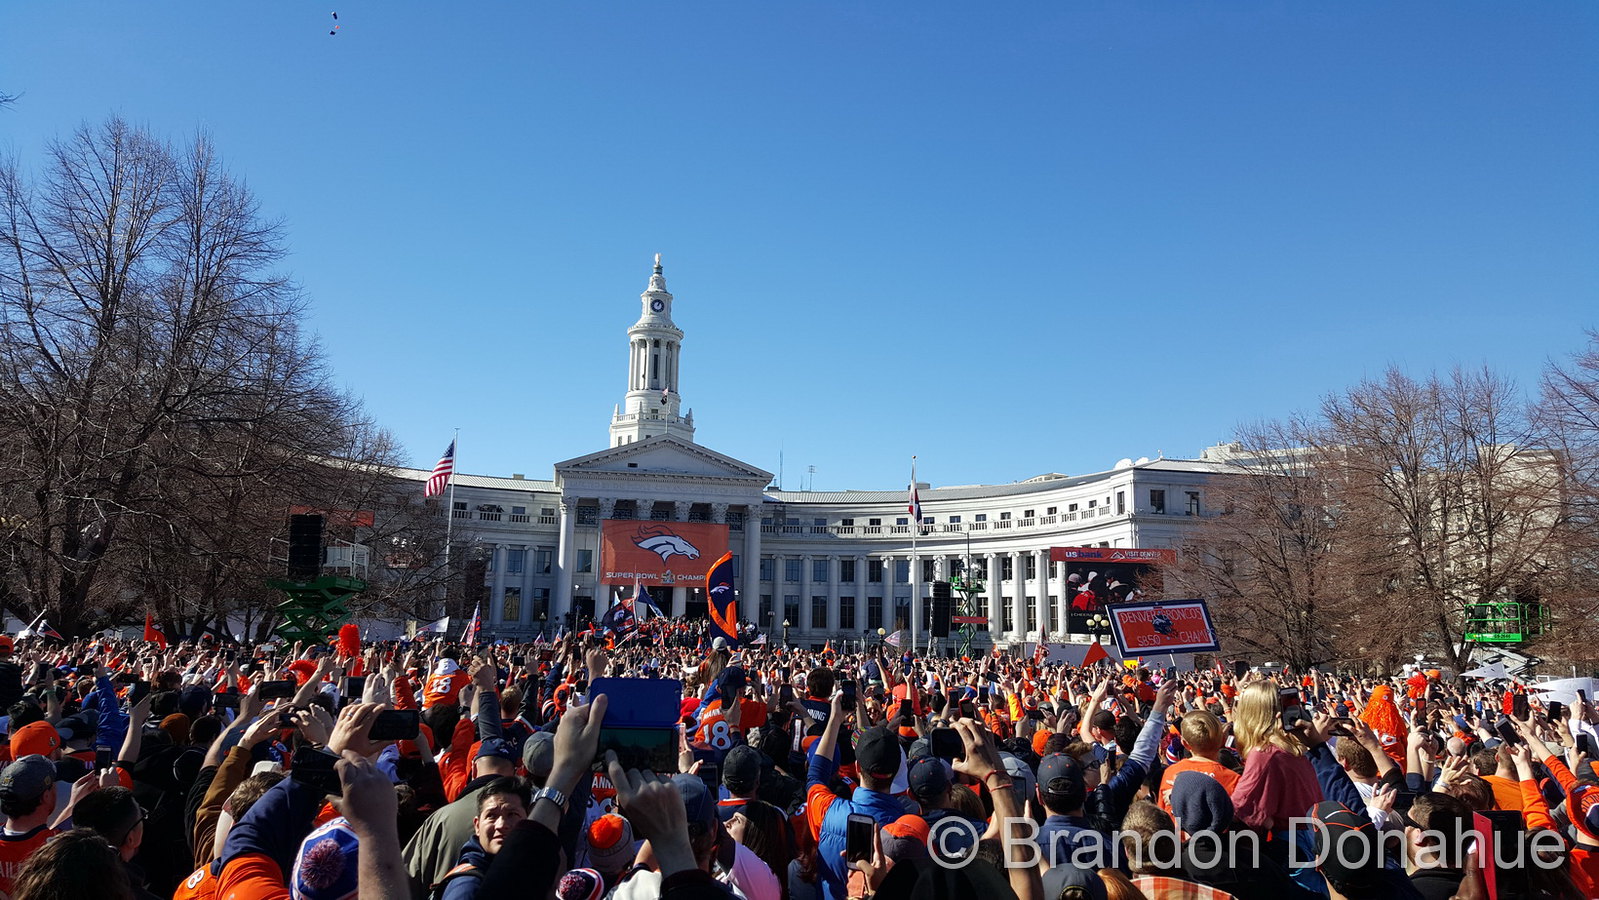 February 2016 started with snow but the weather changed for the warmer allowing for a gorgeous day to welcome home the Super Bowl champion Denver Broncos. (Brandon Donahue)